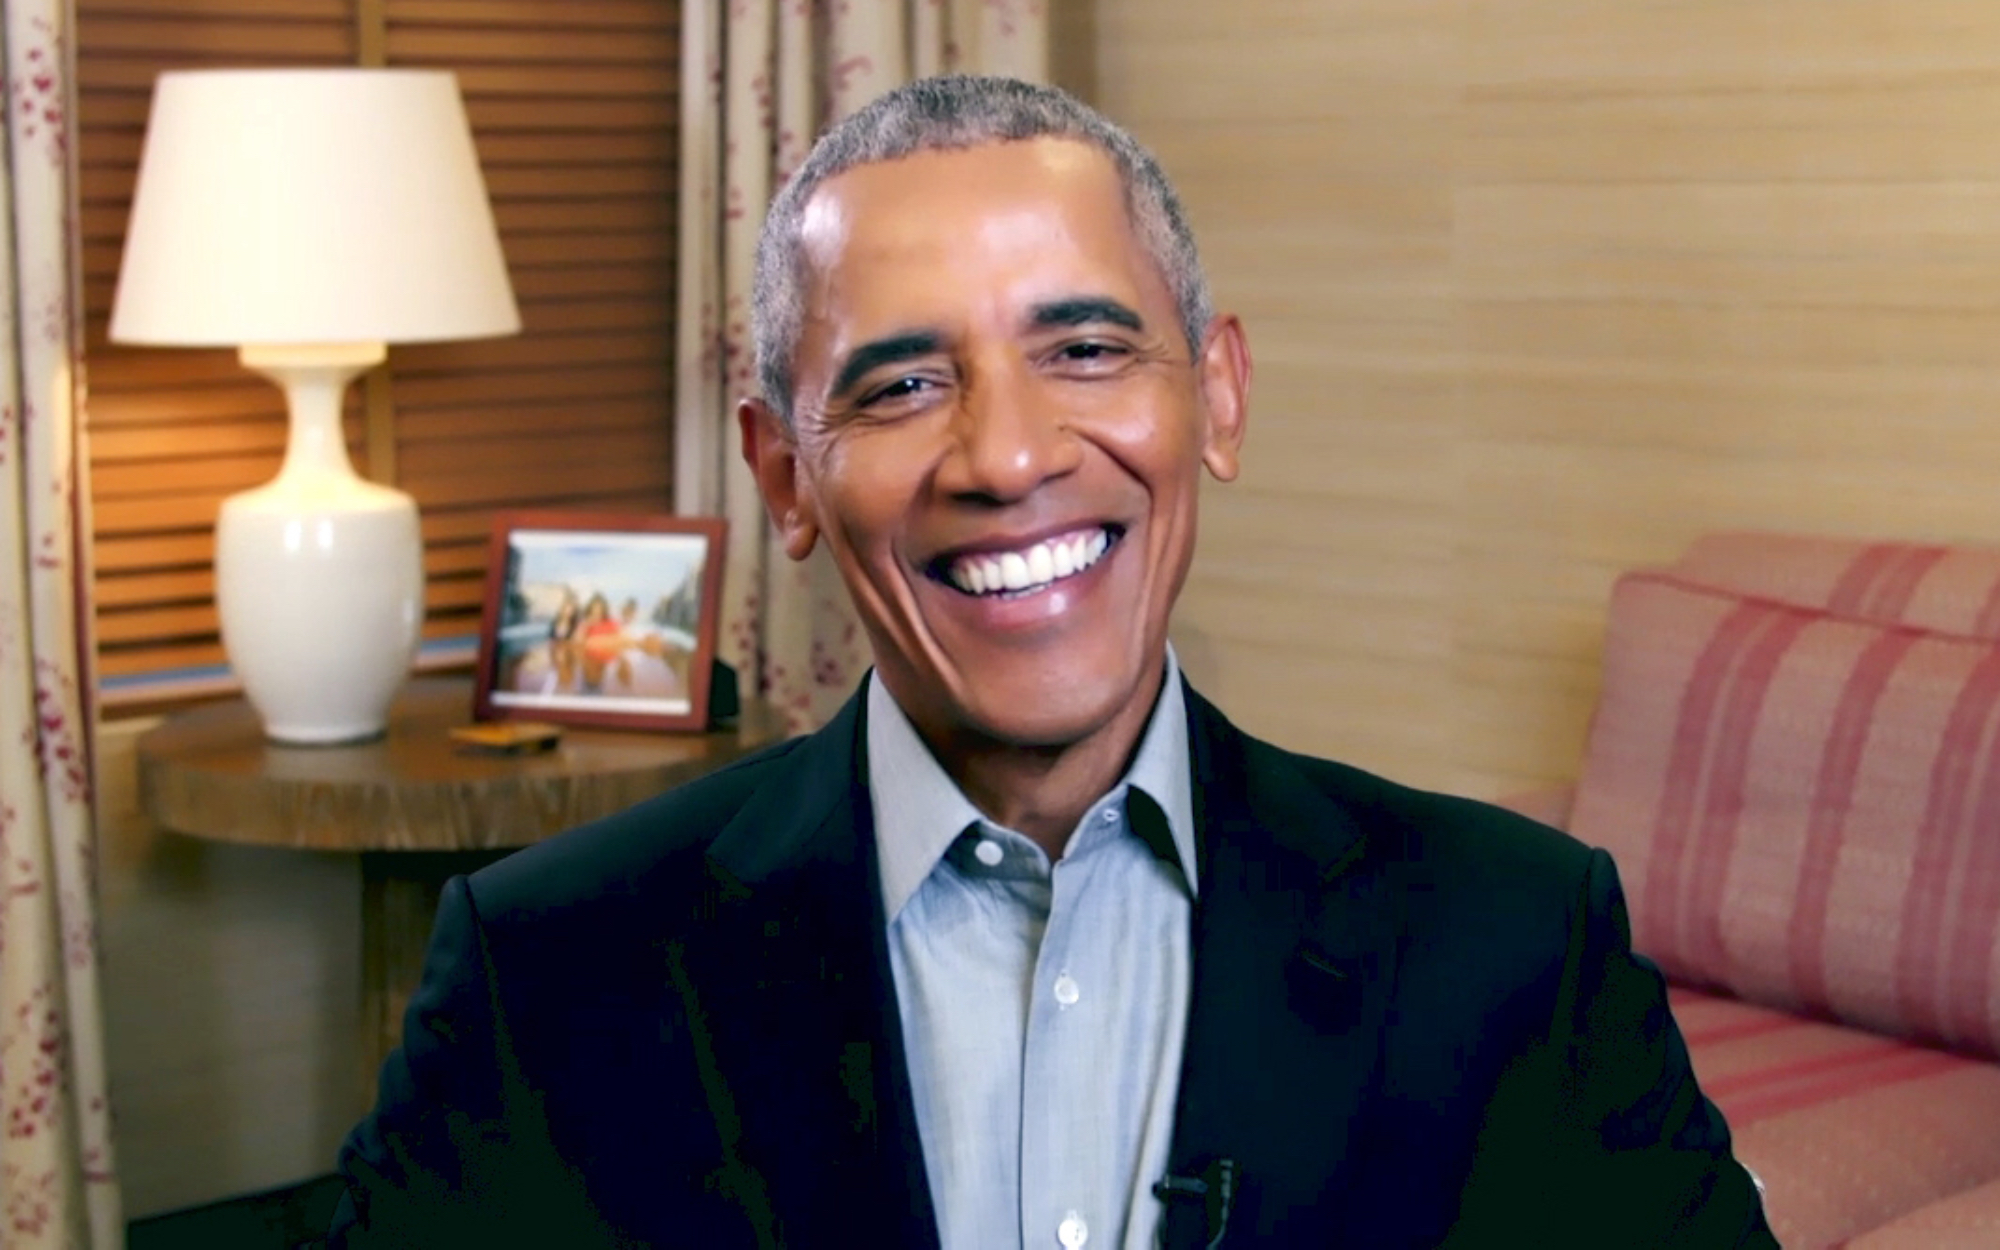 Barack Obama featured in his favorite movies of 2021 smiling in front of a picture frame